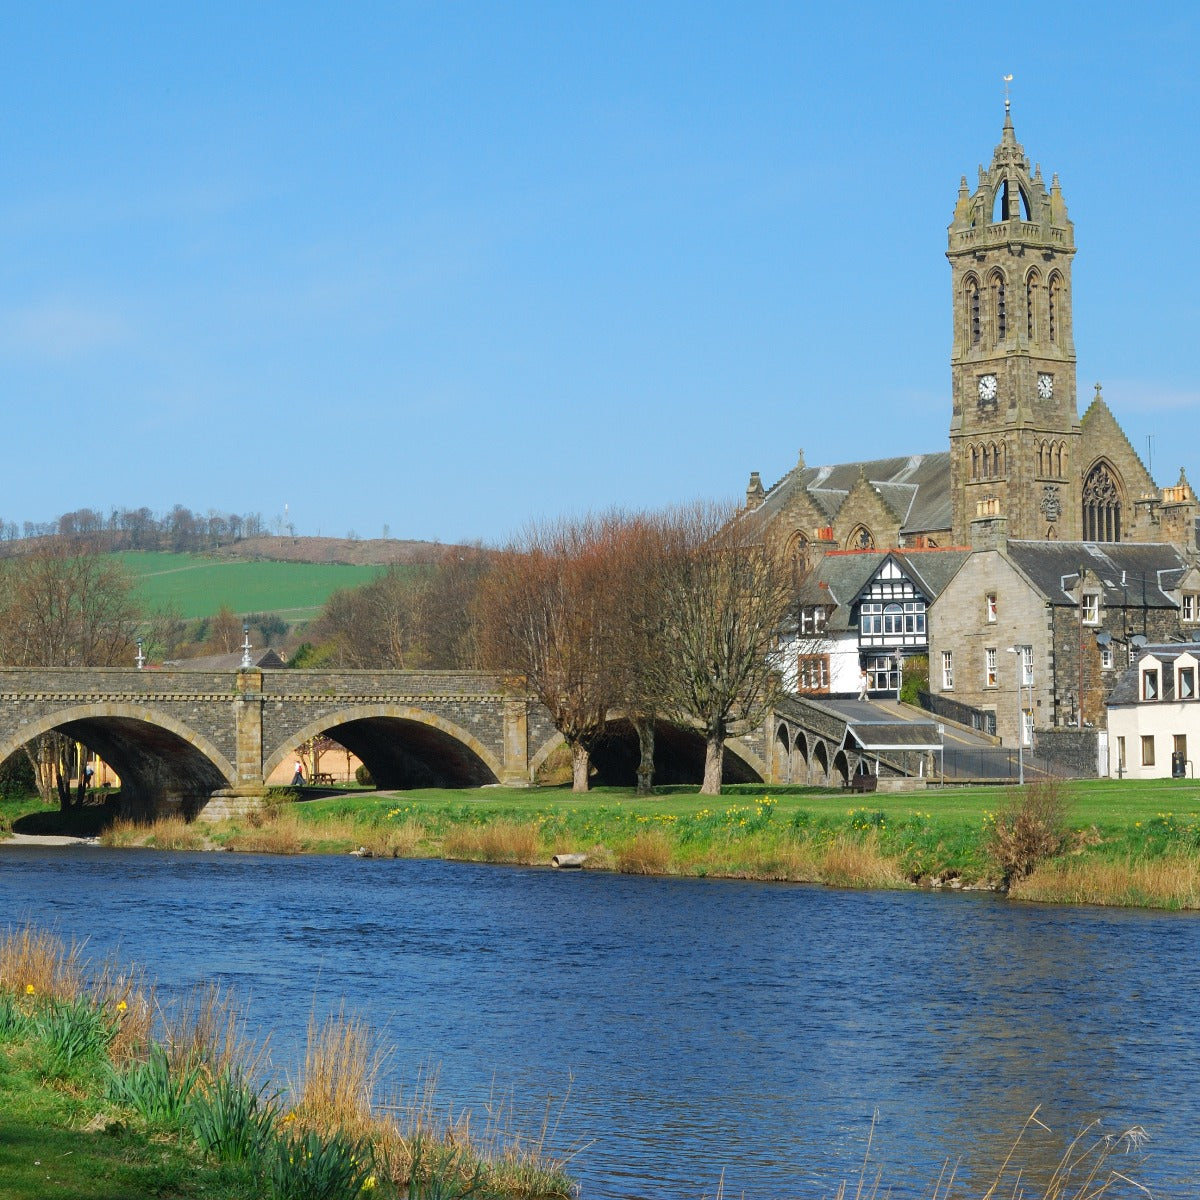 The River Tweed and Peebles